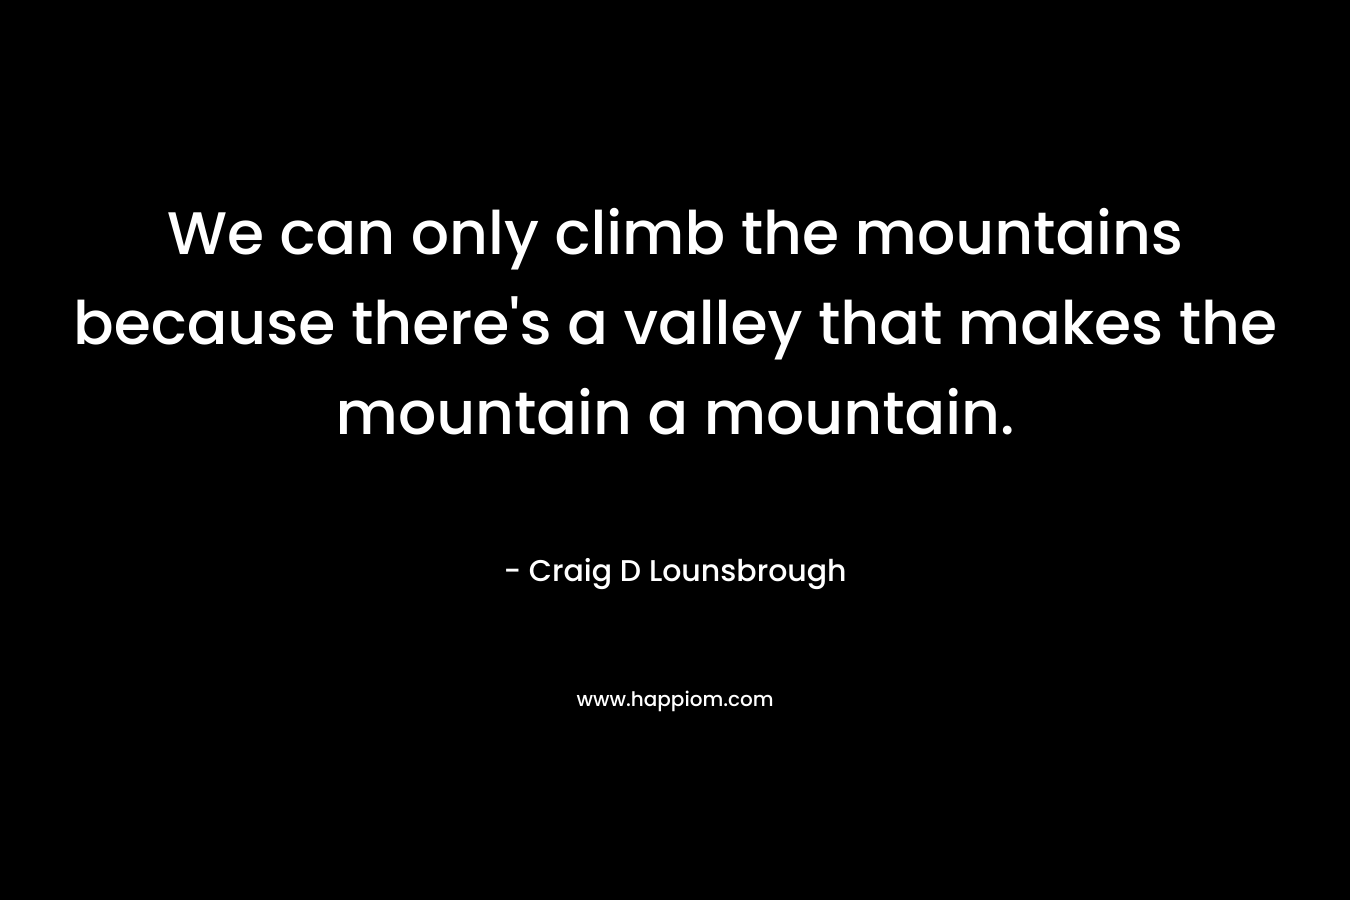 We can only climb the mountains because there's a valley that makes the mountain a mountain.